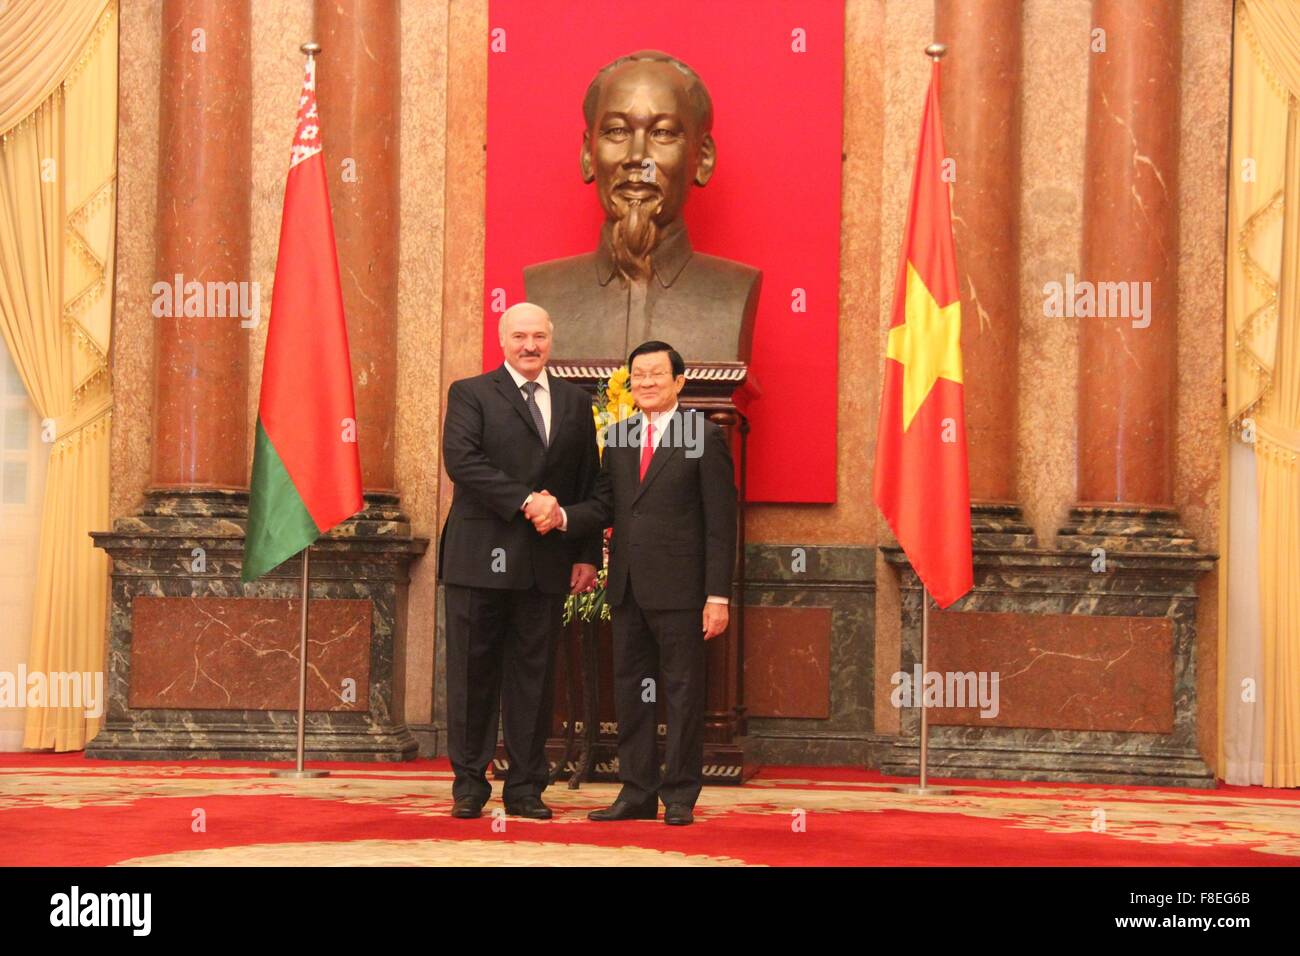 (151209) -- HANOI, Dec. 9, 2015 (Xinhua) -- Vietnamese President Truong Tan Sang (R) shakes hands with Belarusian President Alexander Lukashenko in Hanoi, capital of Vietnam, Dec. 9, 2015. Lukashenko is paying a two-day official visit to Vietnam from Tuesday. (Xinhua/Le Yanna) Stock Photo